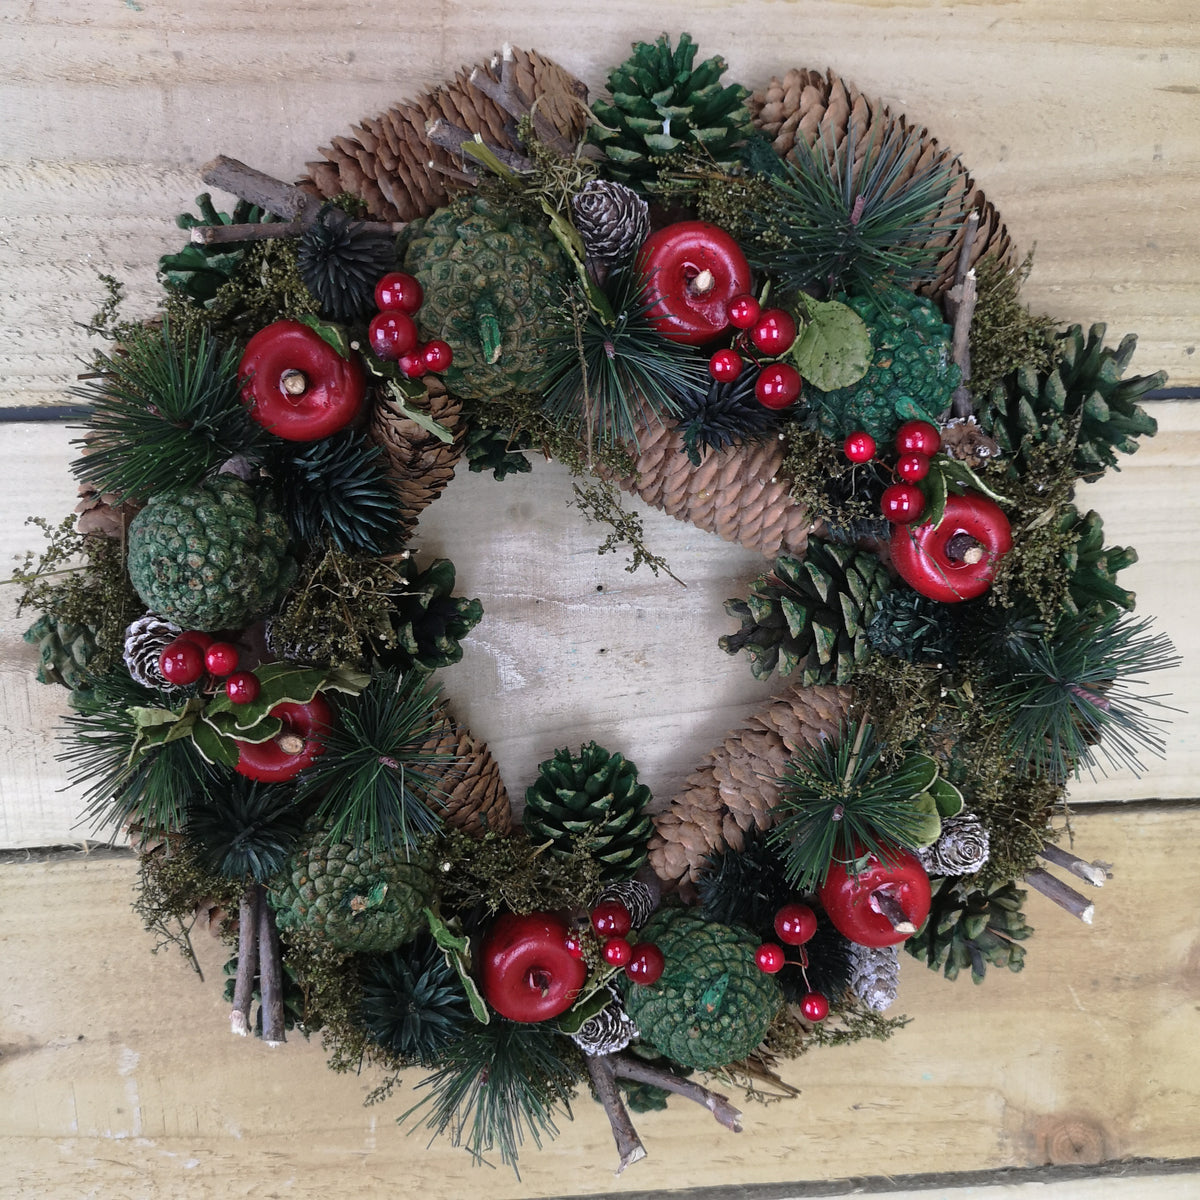 Festive 36cm Red Berry And Apple Christmas Wreath In Box